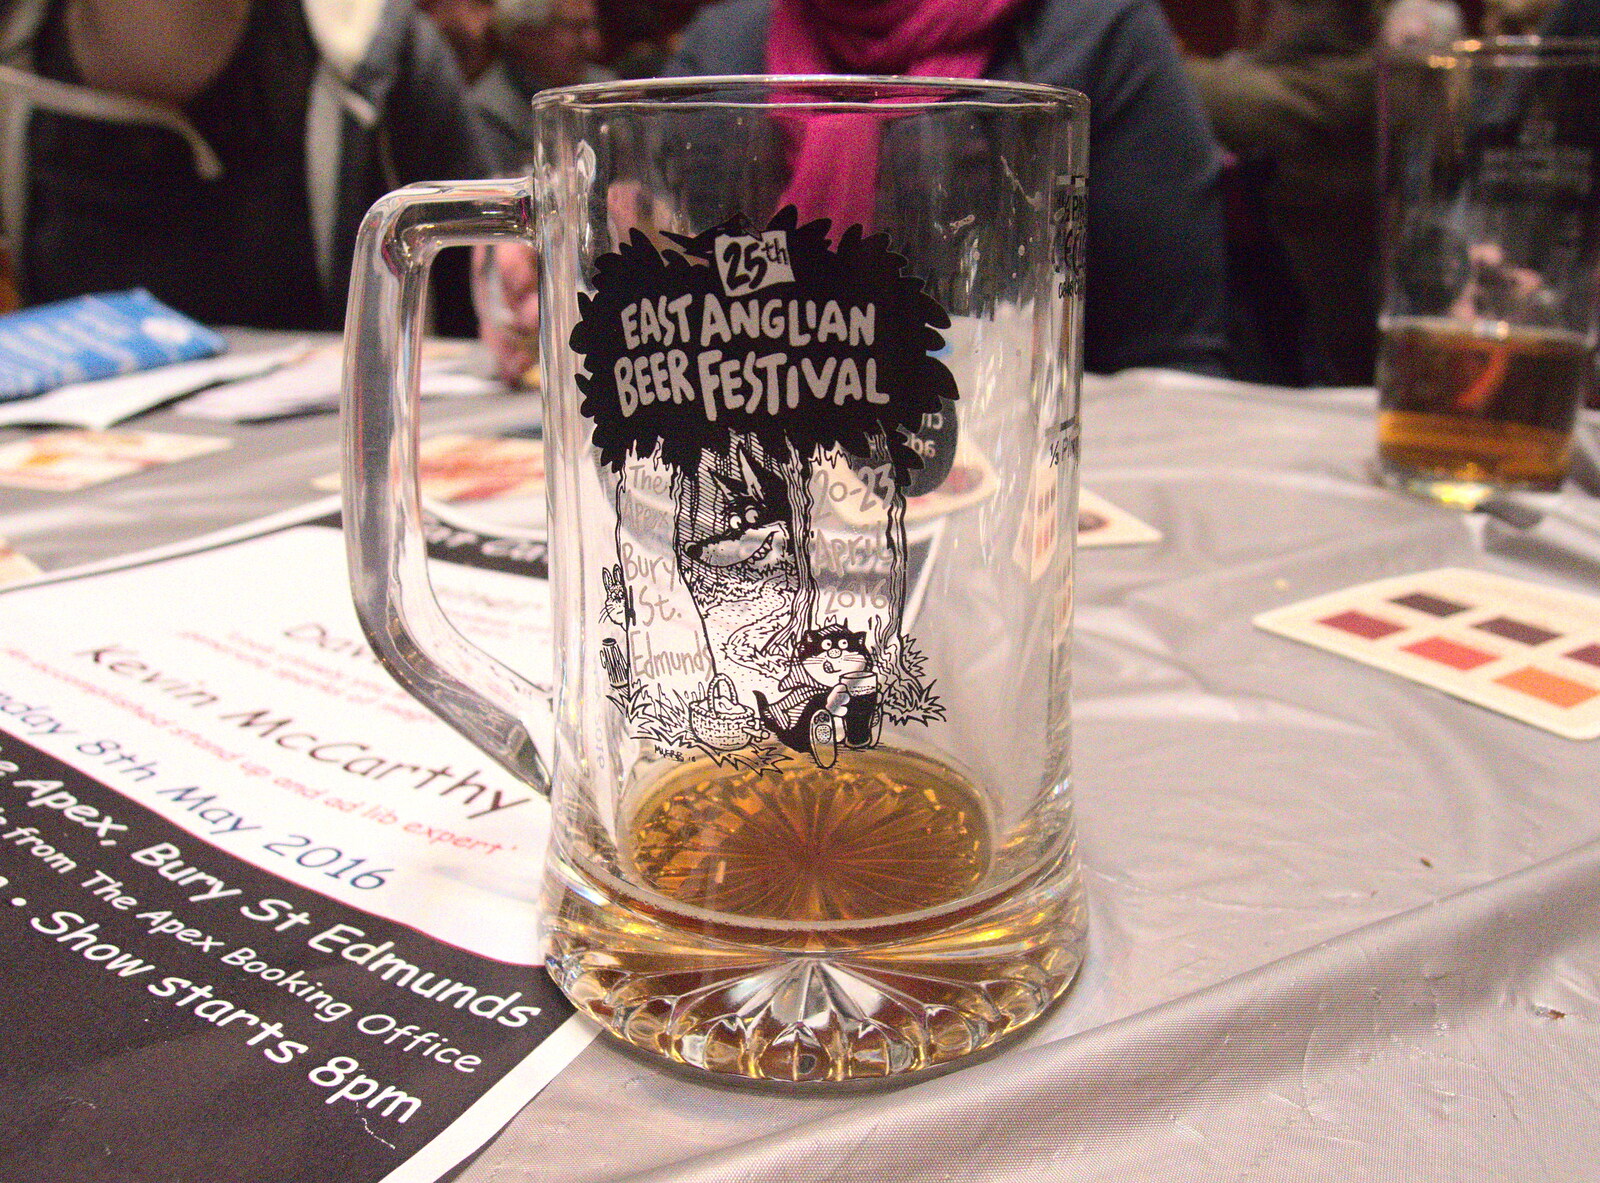 Nosher's half-pint glass from The East Anglian Beer Festival, Bury St Edmunds, Suffolk - 23rd April 2016